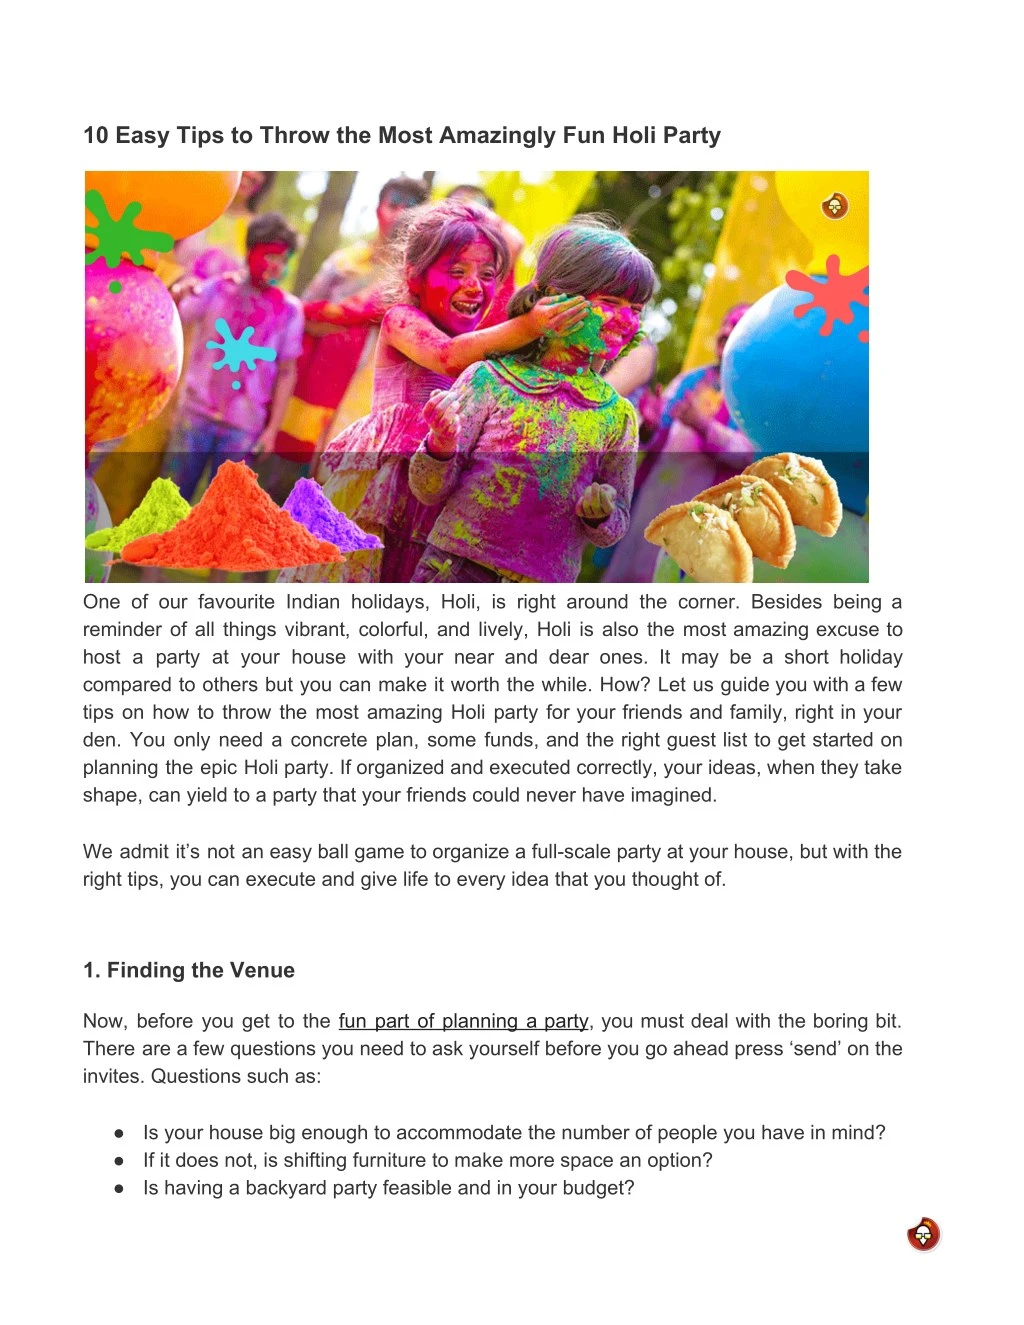 10 easy tips to throw the most amazingly fun holi